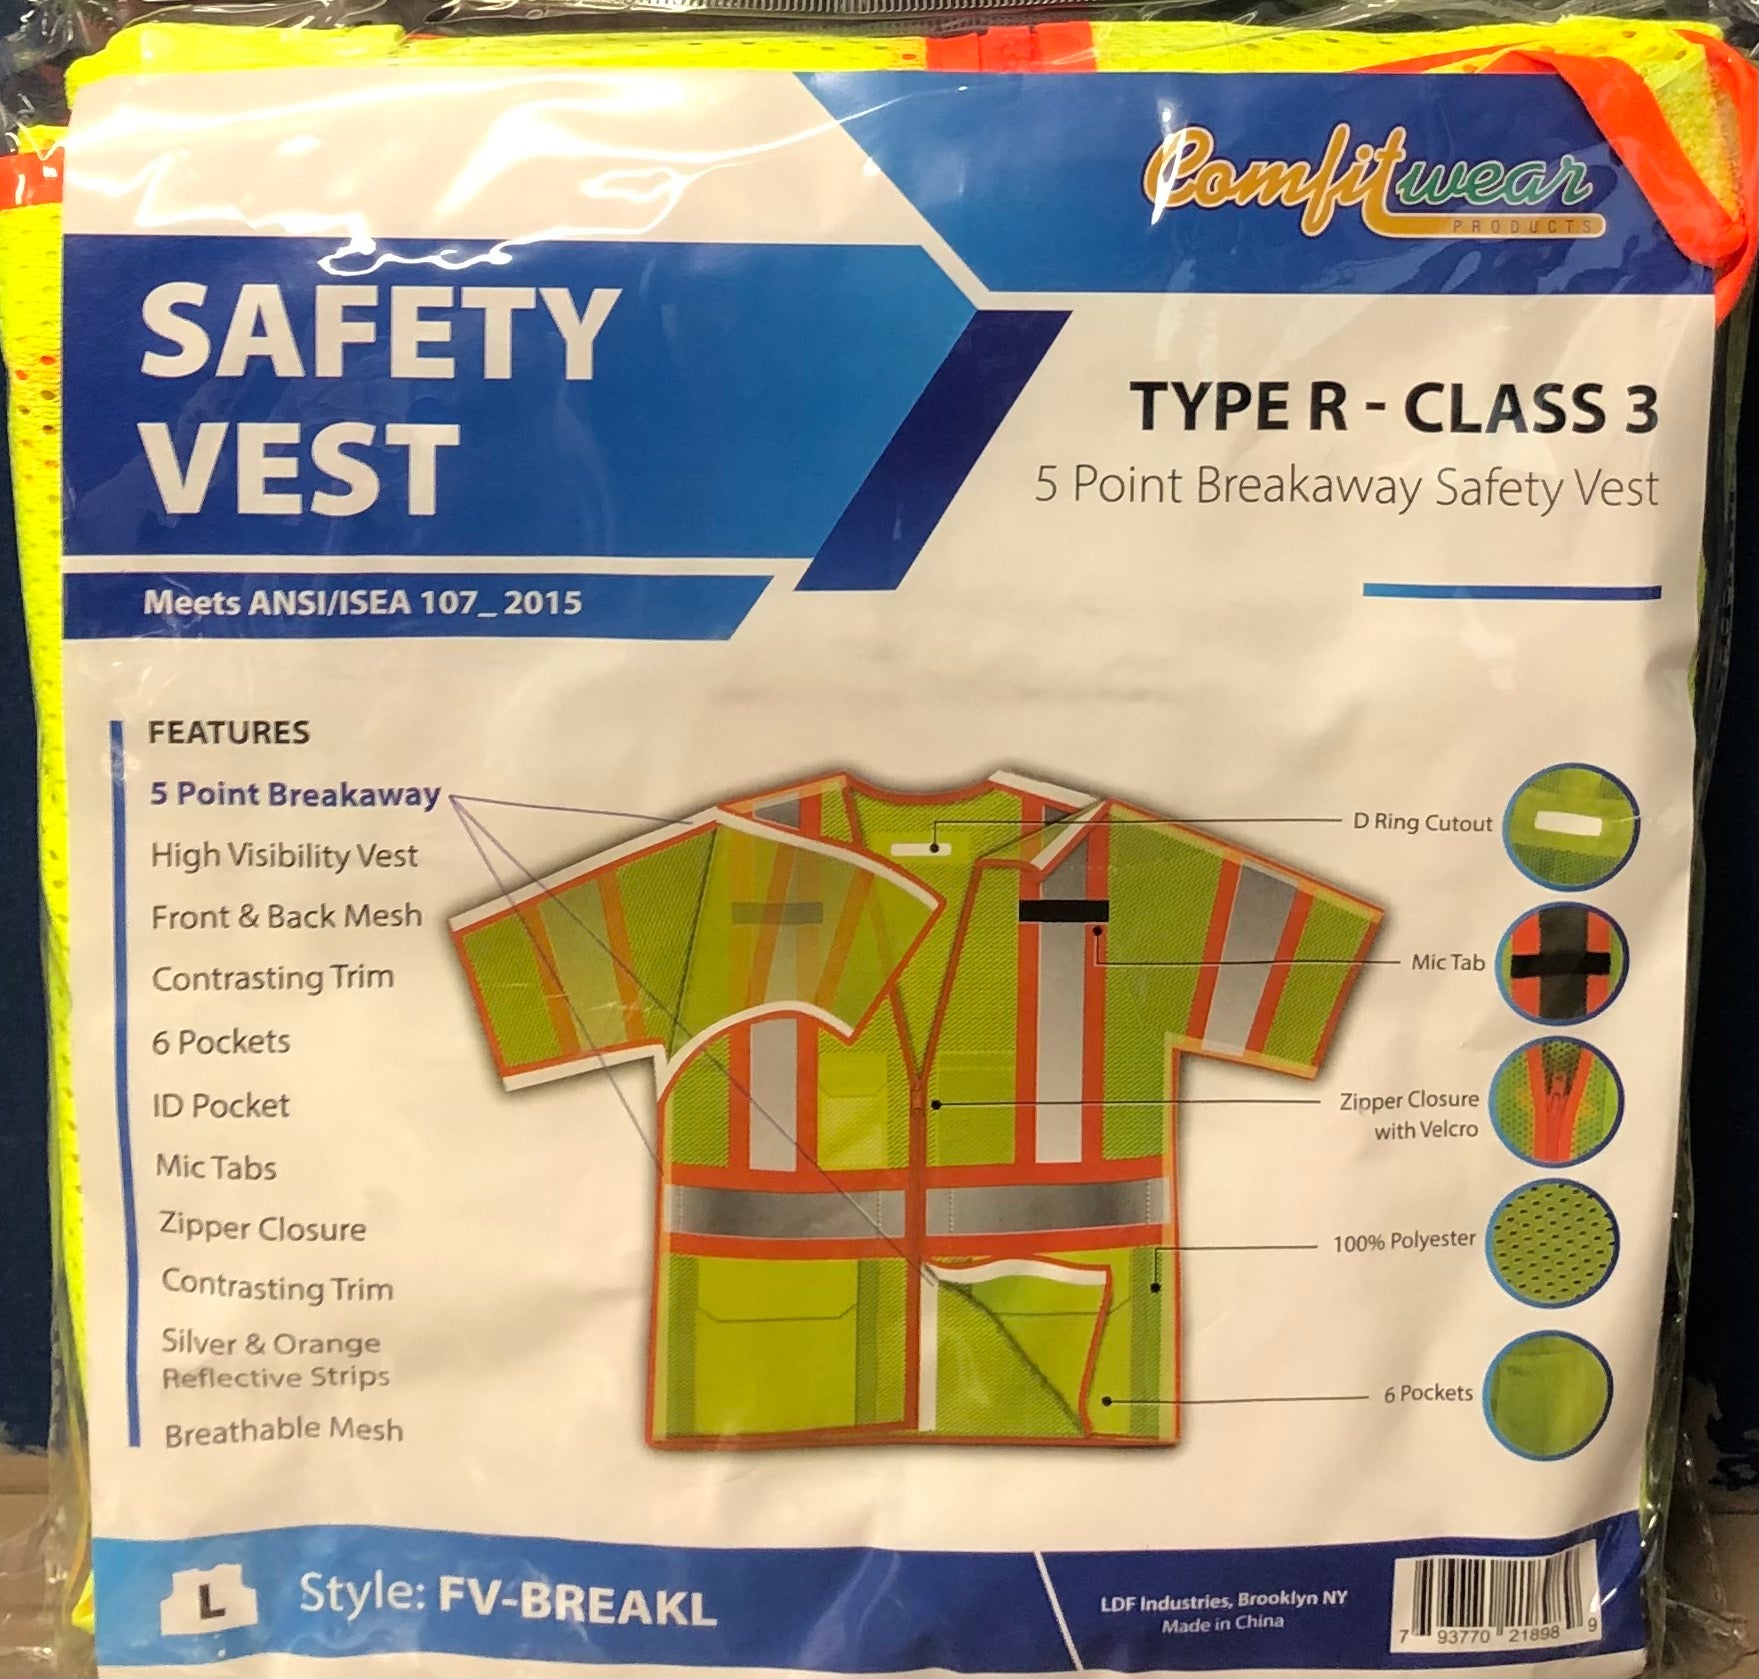 Comfitwear Products Type R - Class 3 5 Point Breakaway Saftey Vest